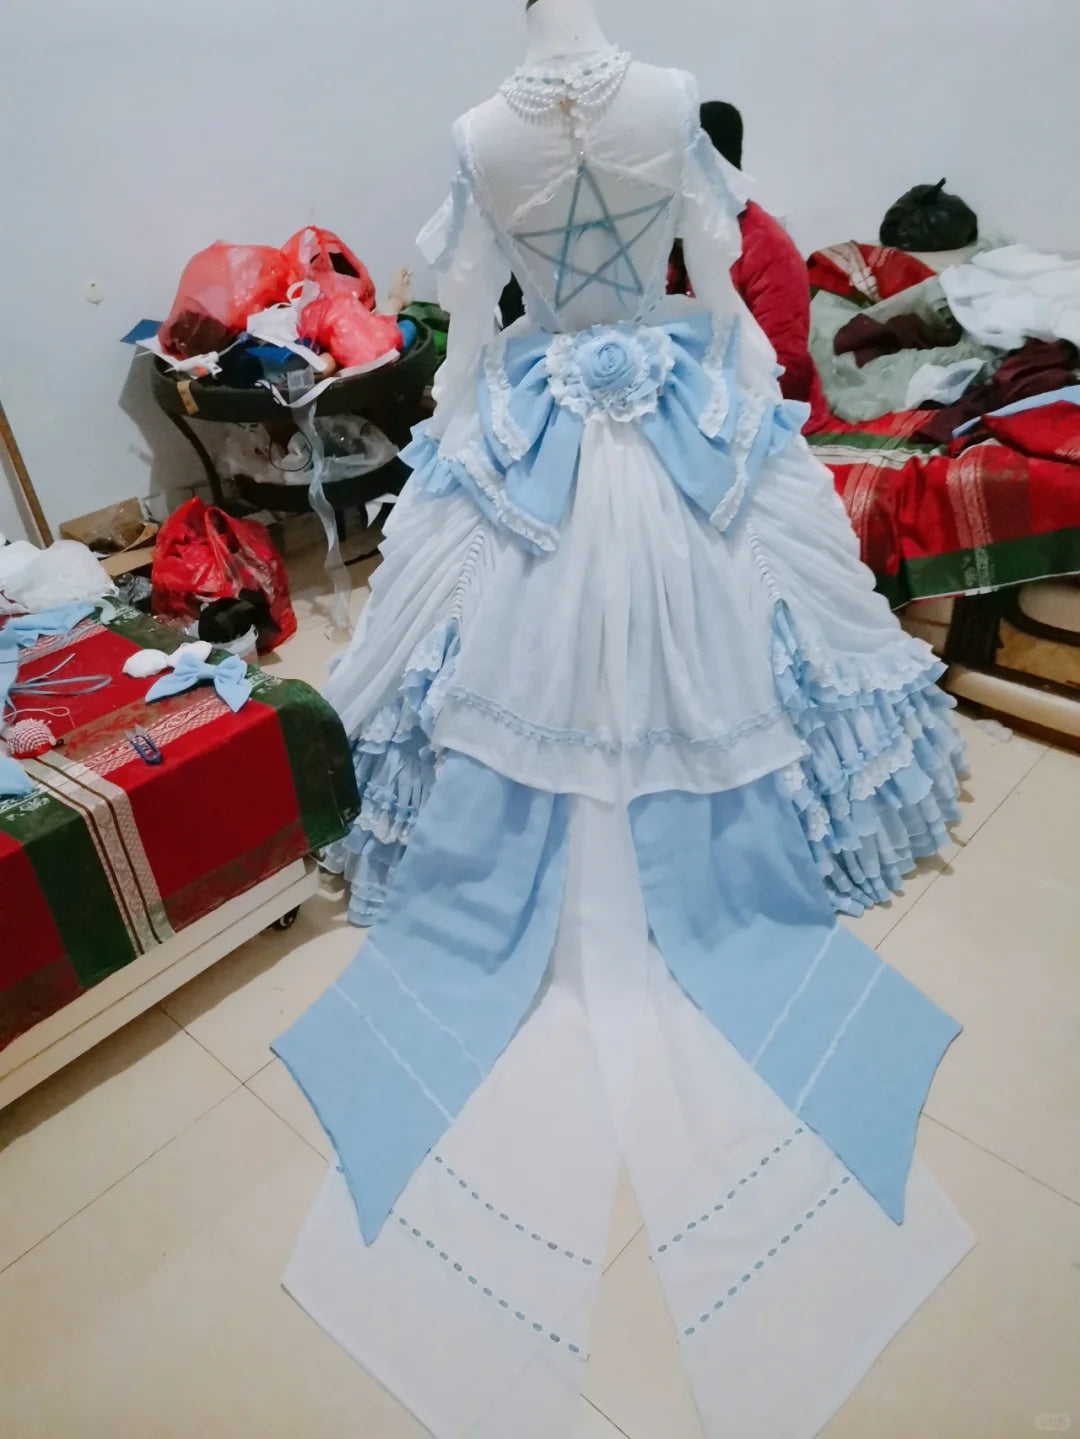 Hachimicos Blue Gothic Lolita Dress Cosplay Costume From Hachimicos